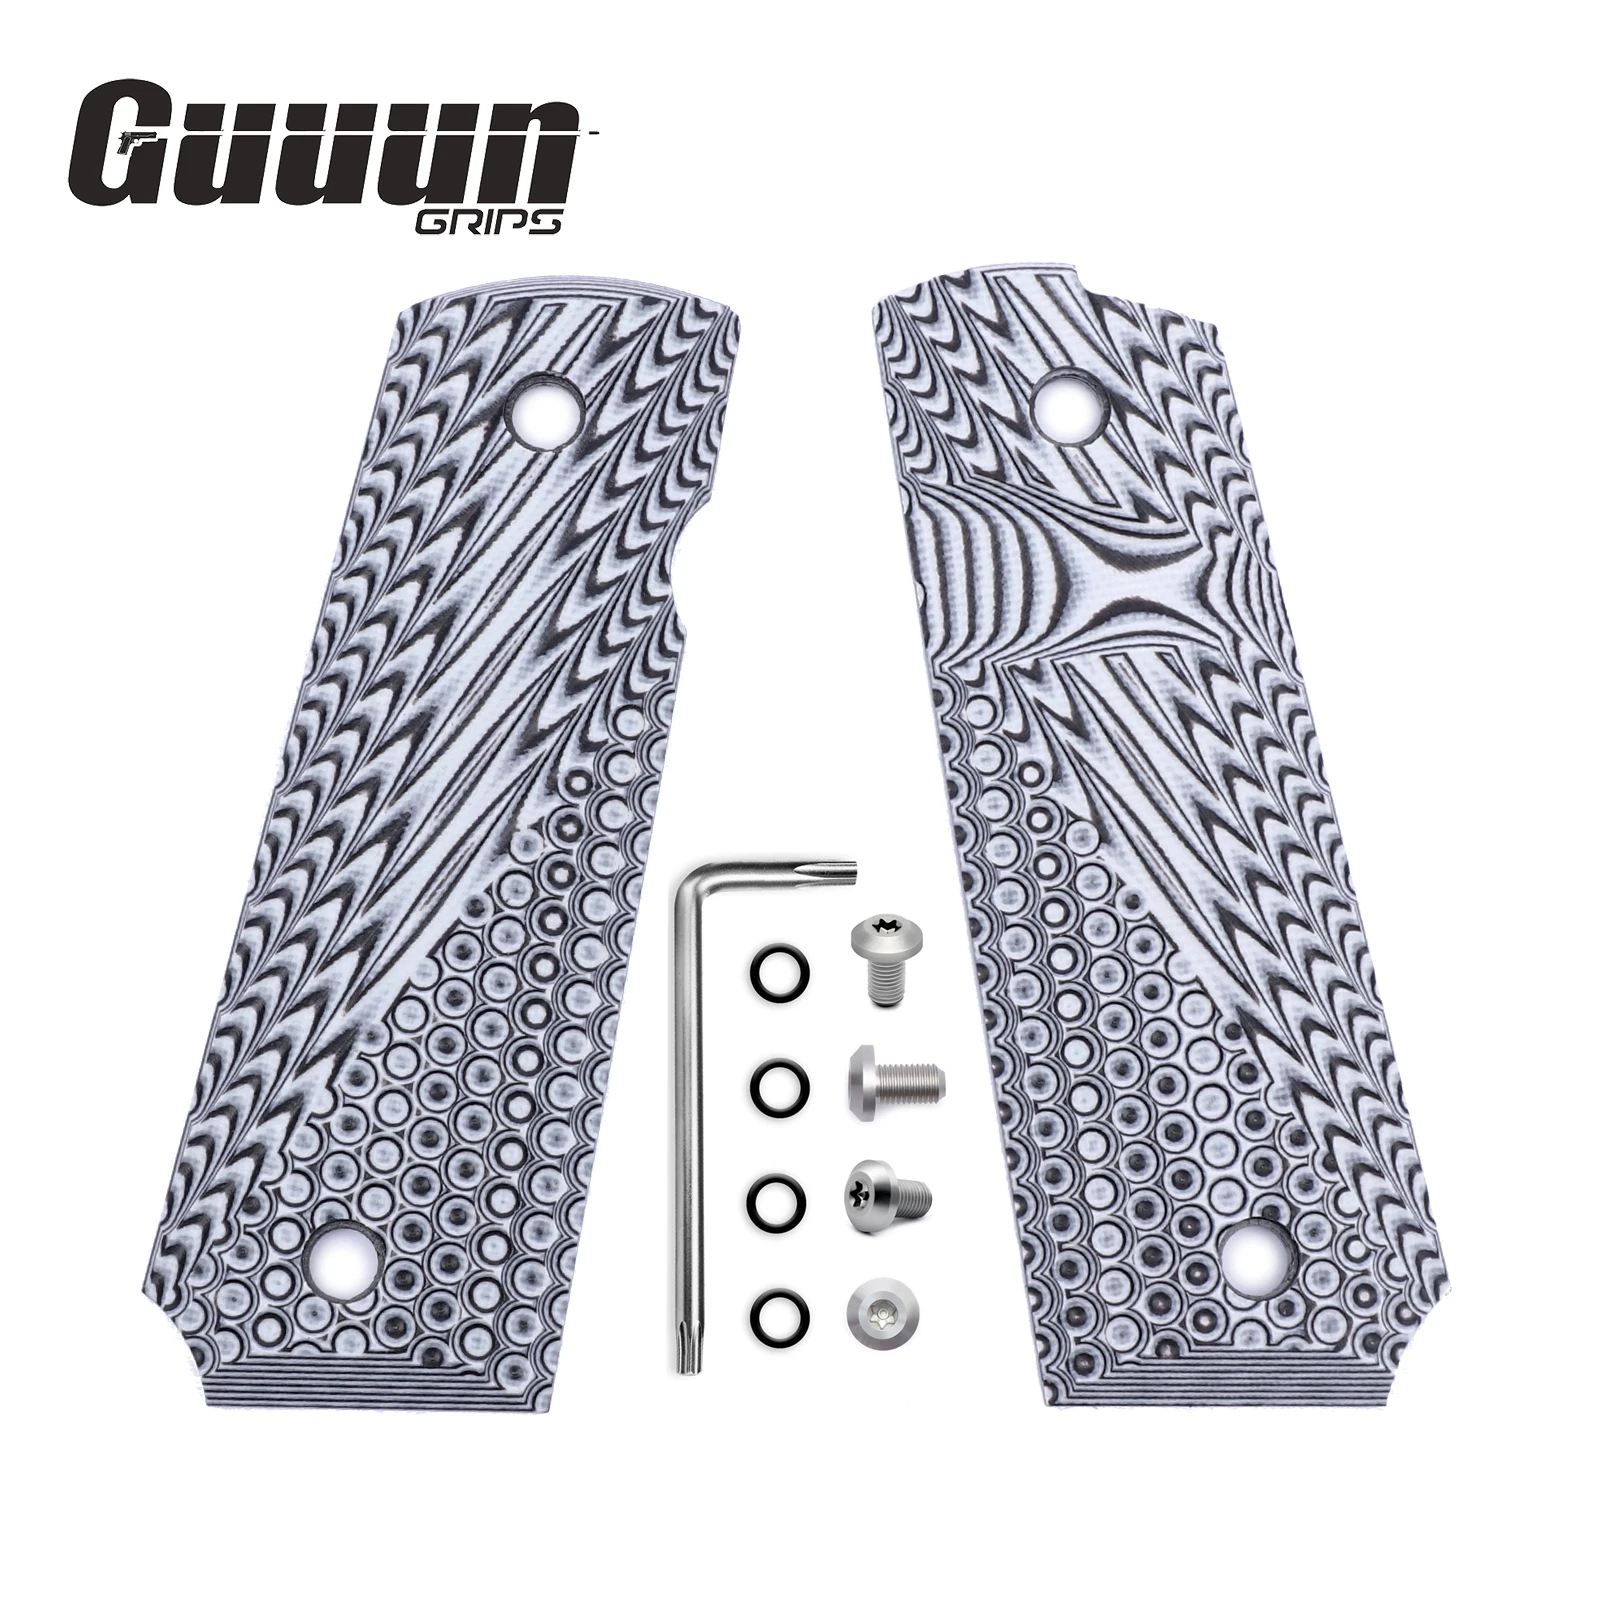 Guuun 1911 Grips G10 Full Size Government Commander Grip OPS Texture